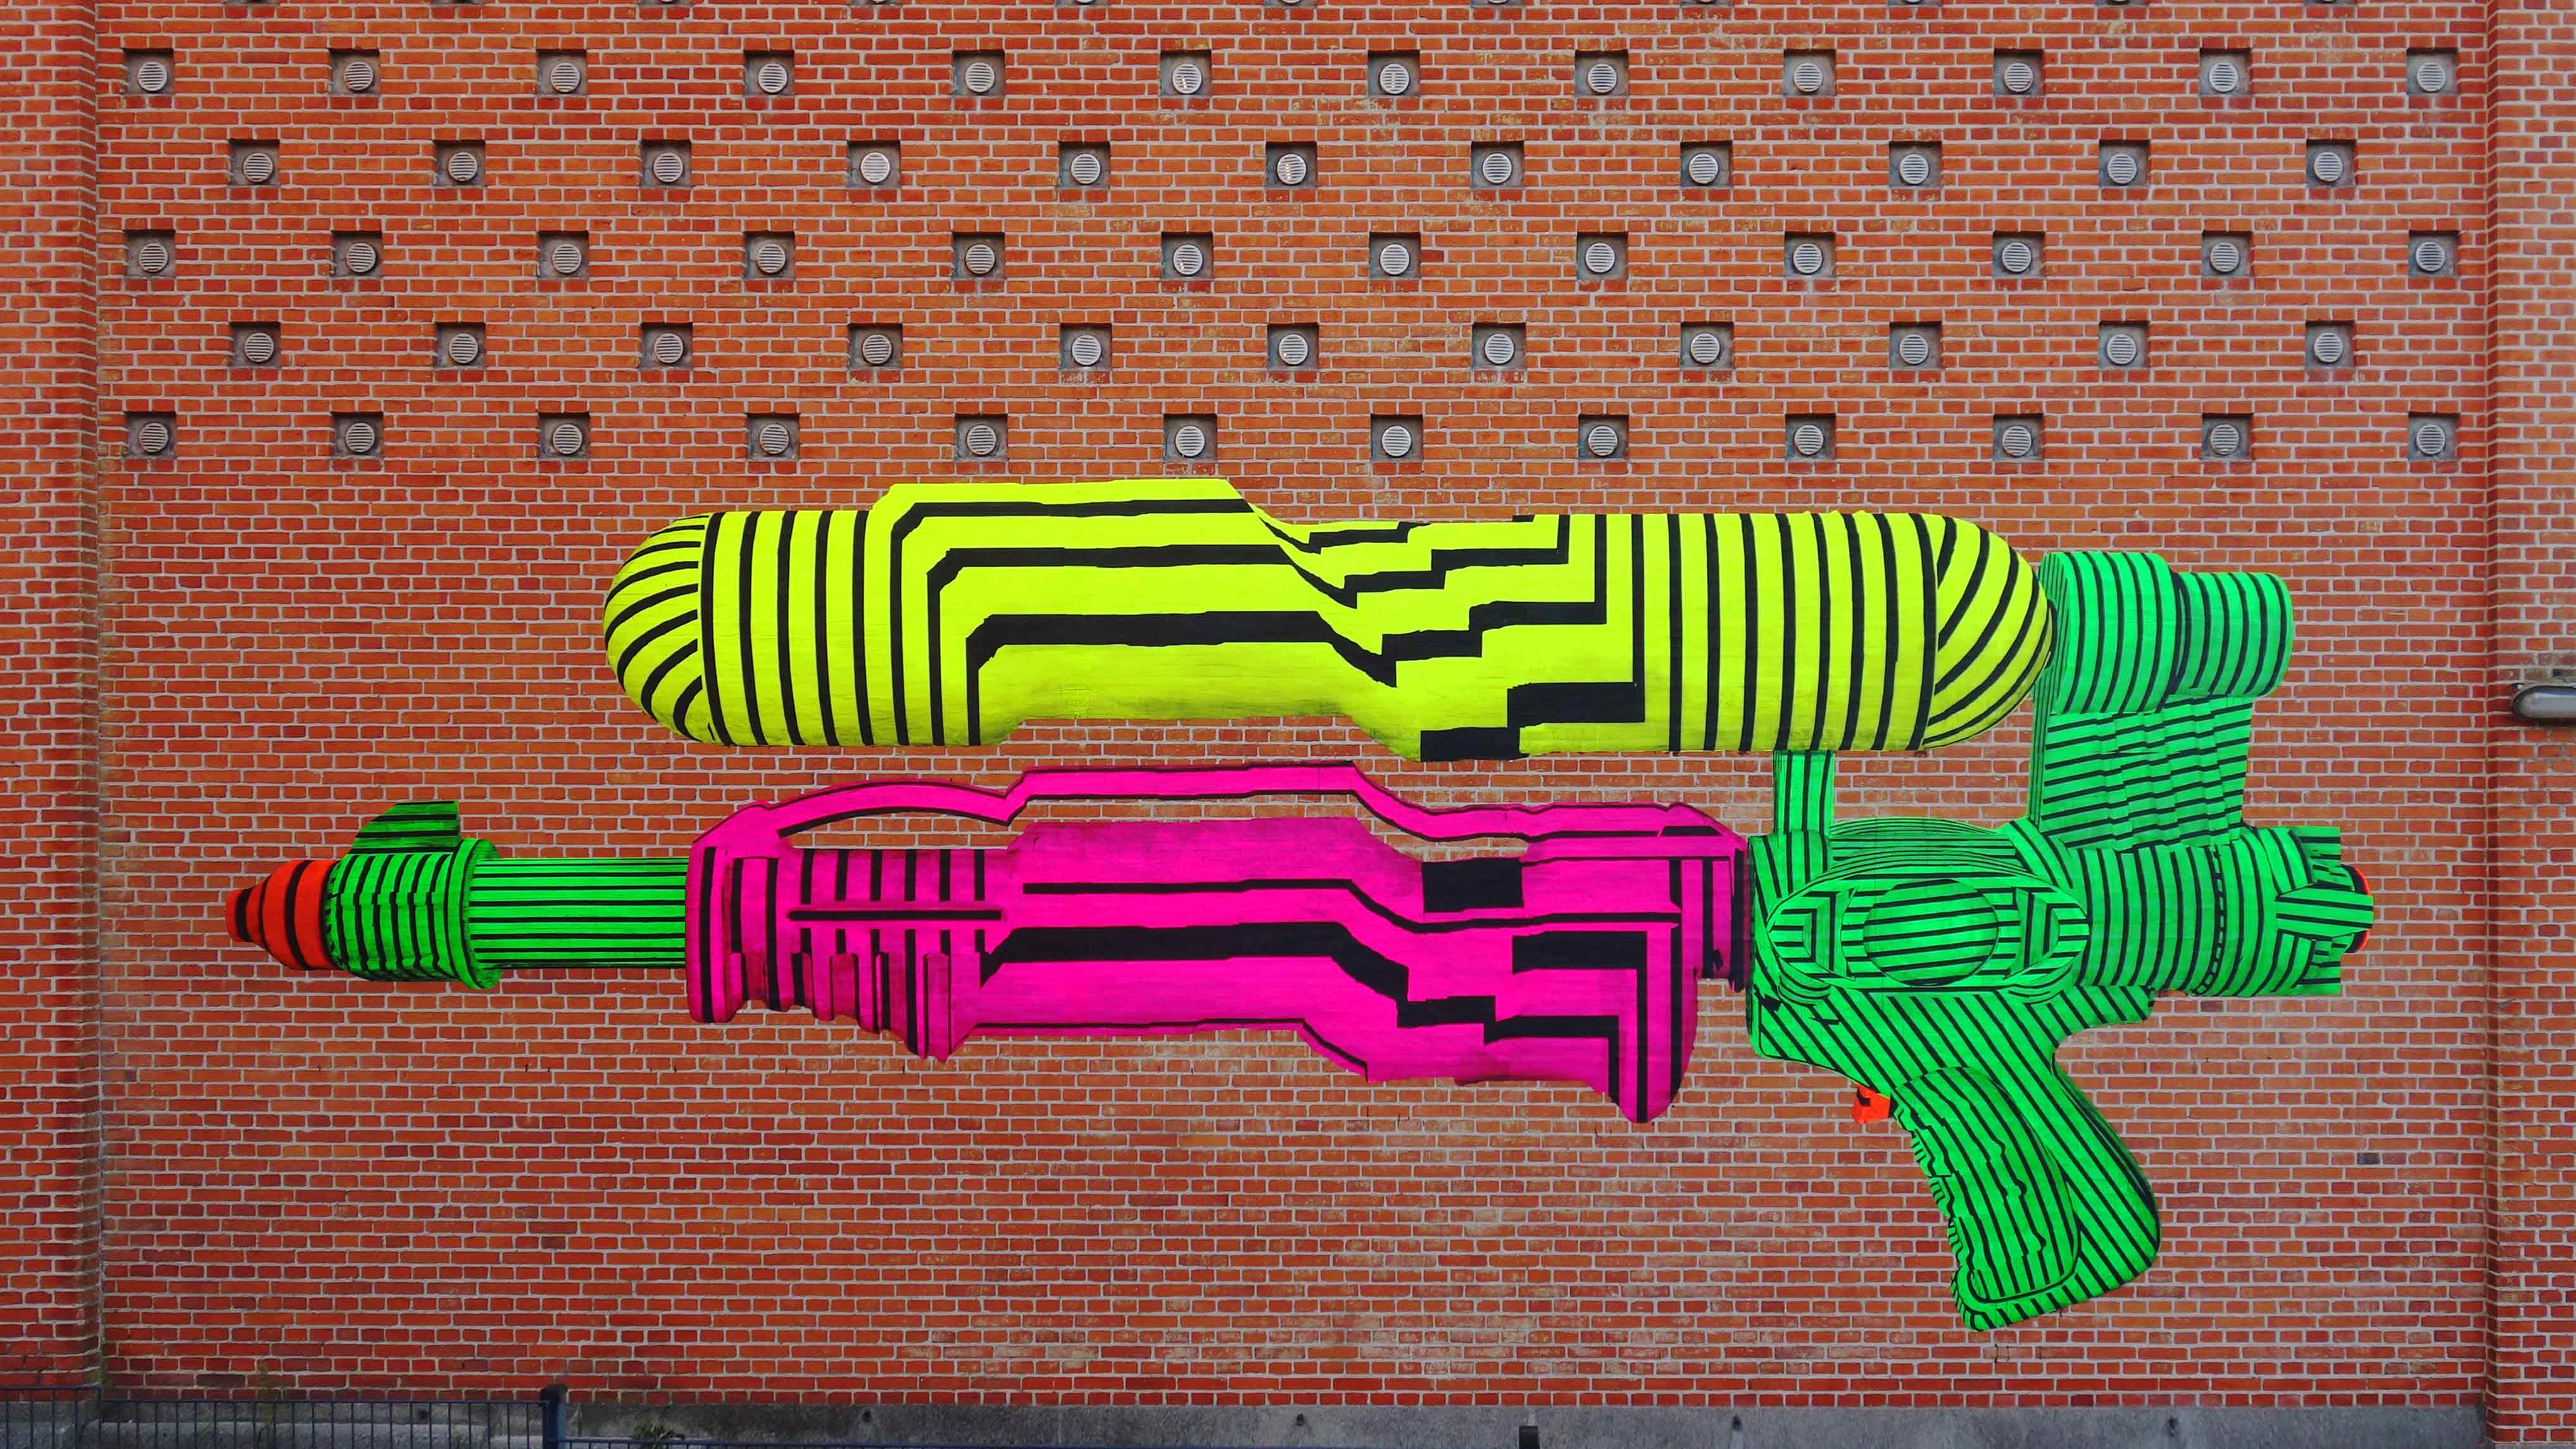 'Water gun' 2020. Adhesive foil and duct tape on wall. Klister kunst festival, Køge